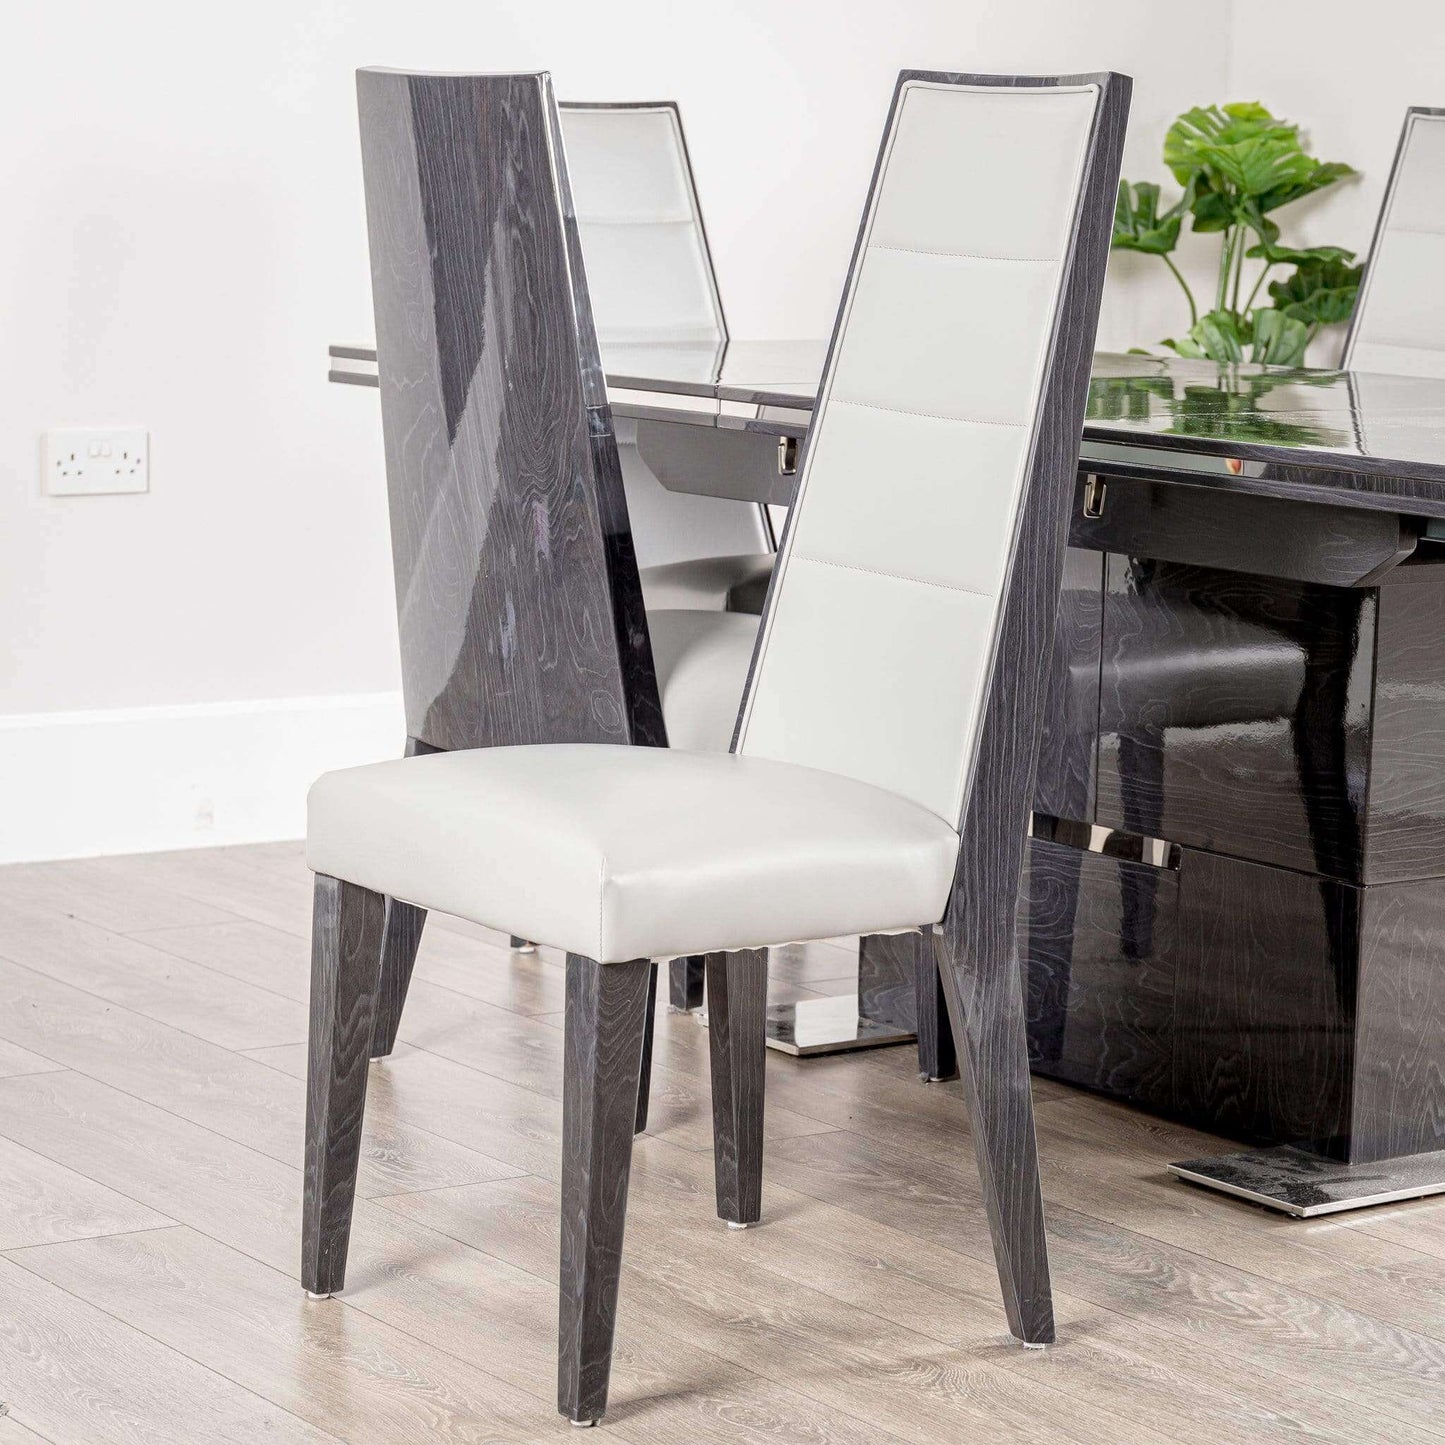 Furniture  -  Bianca Dining Chair  -  50148919